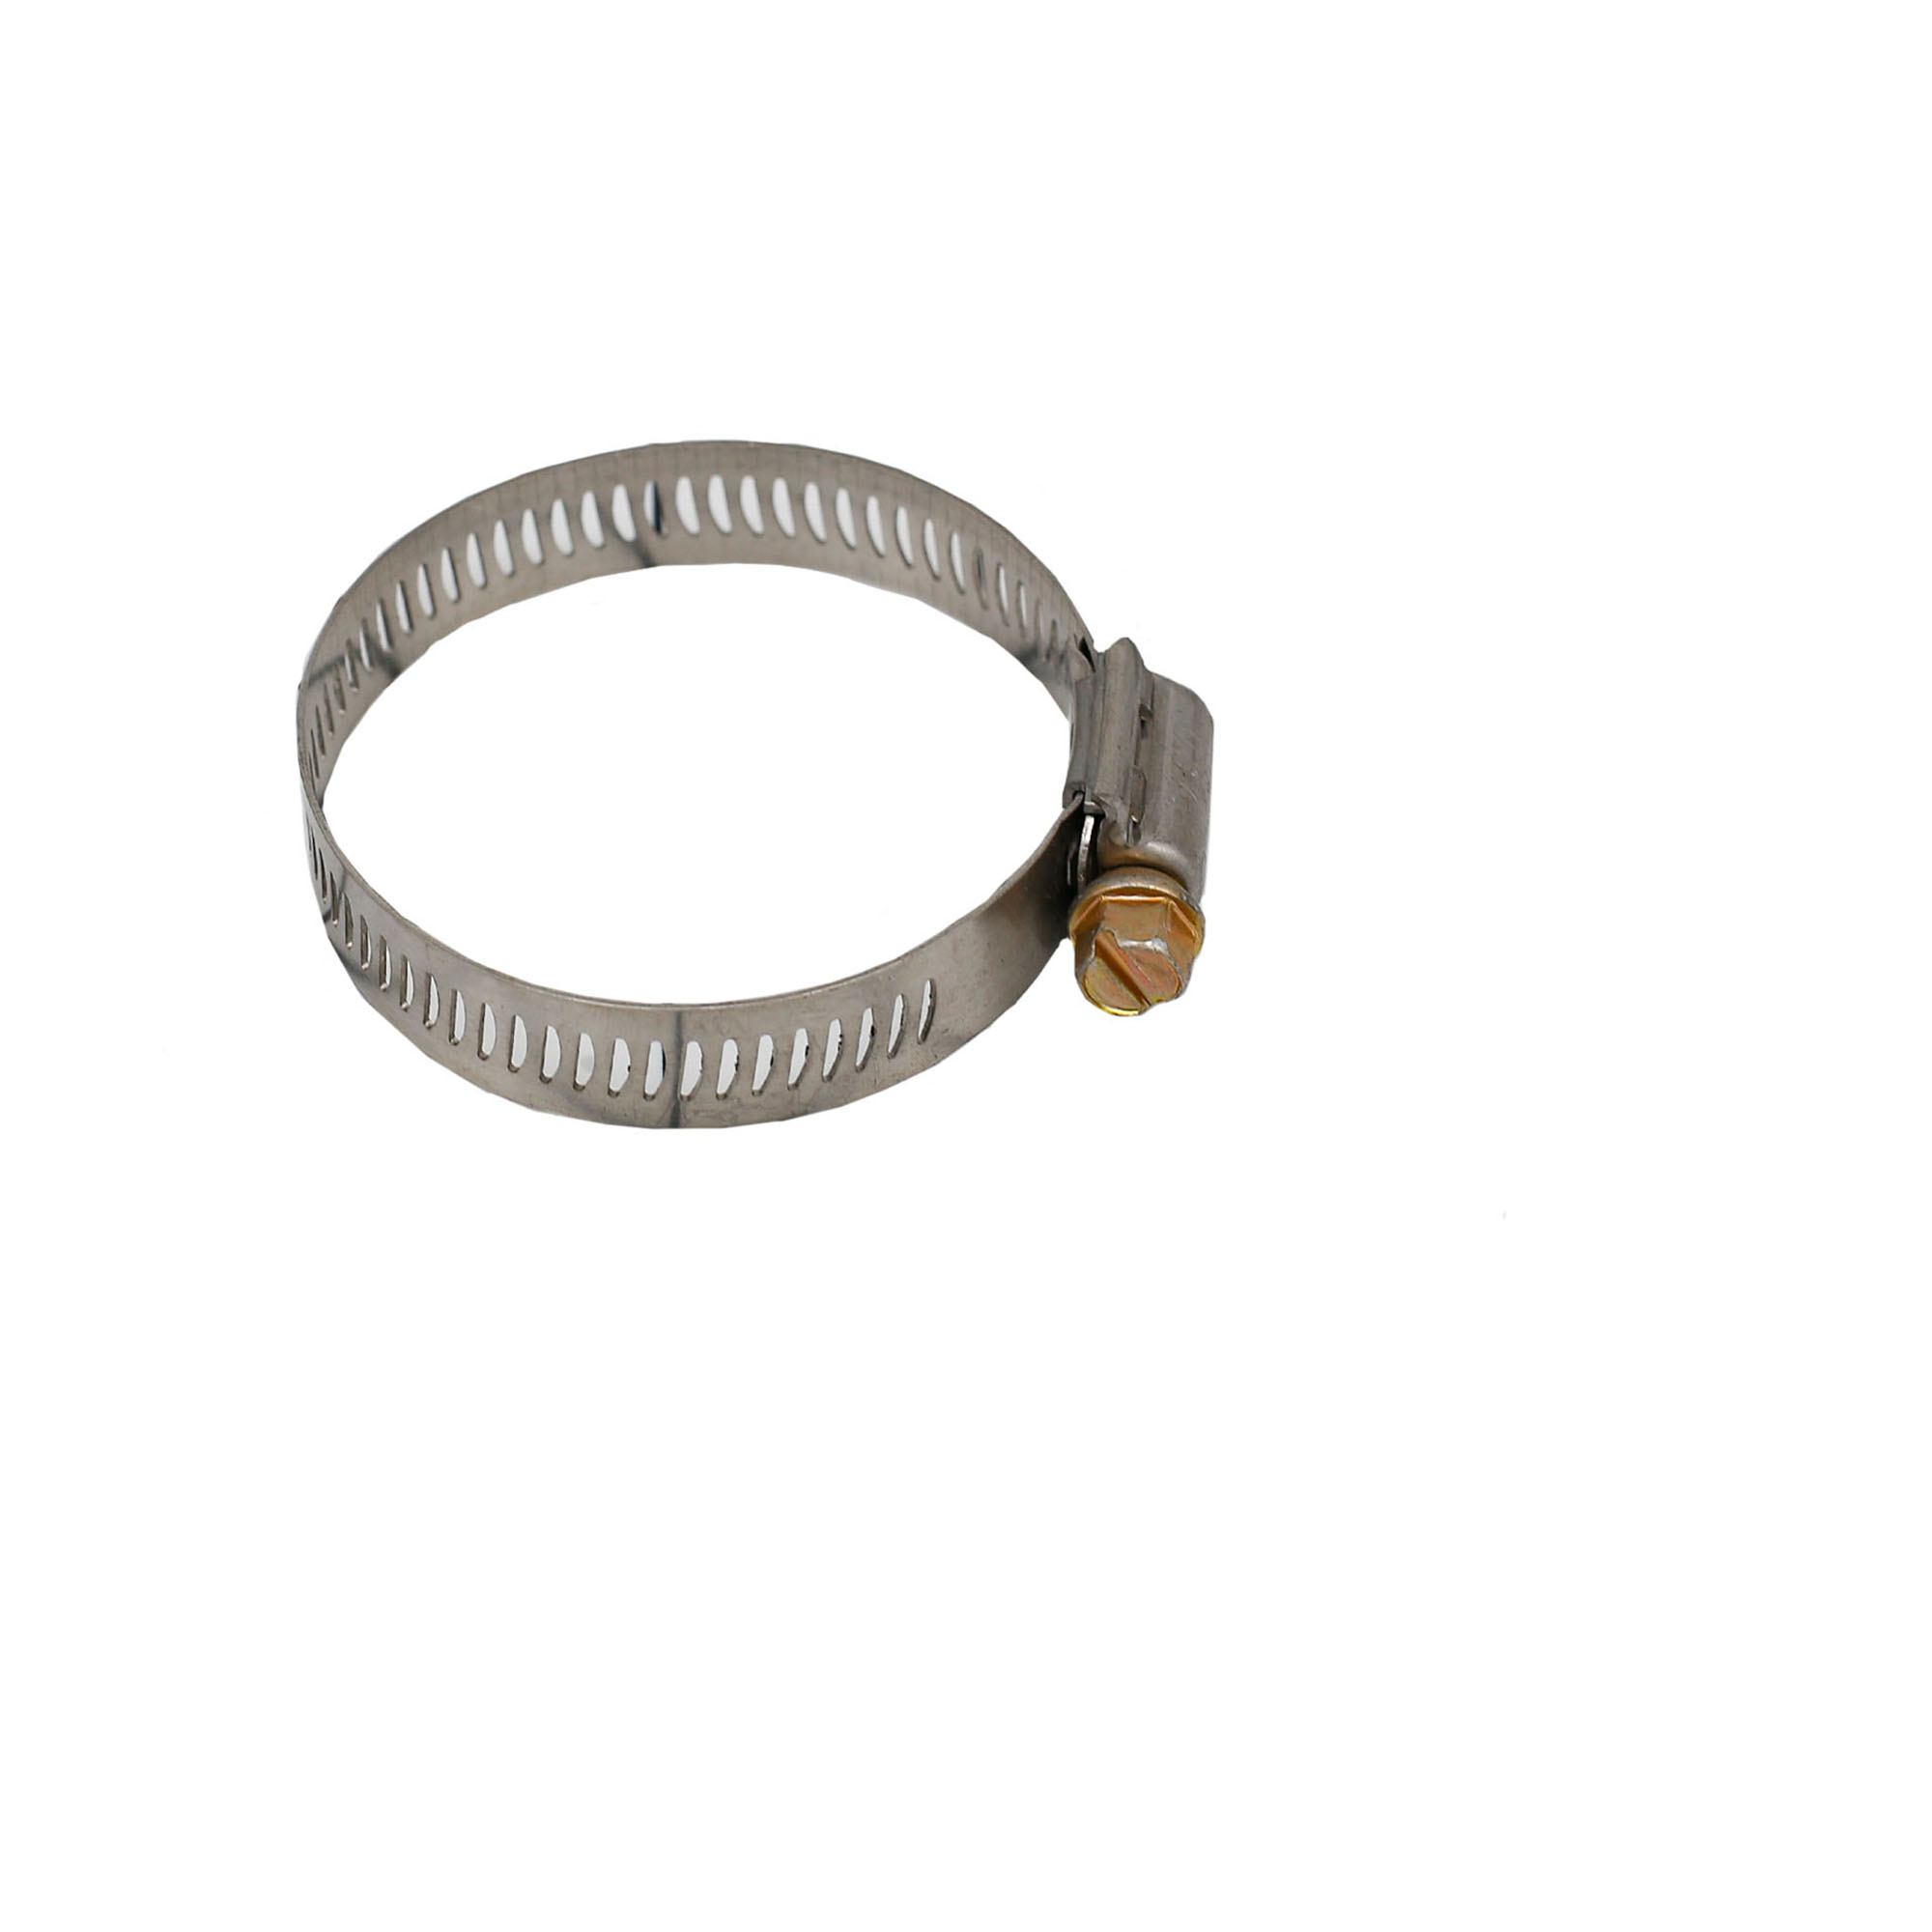 Vacuum Blaster Parts, Cabinet Sandblaster Parts, Parts Washer Replacement Parts, Parts & Accessories, Hose Clamp, 0162 Hose Clamp, American Hawk Industrial, Dee-Blast